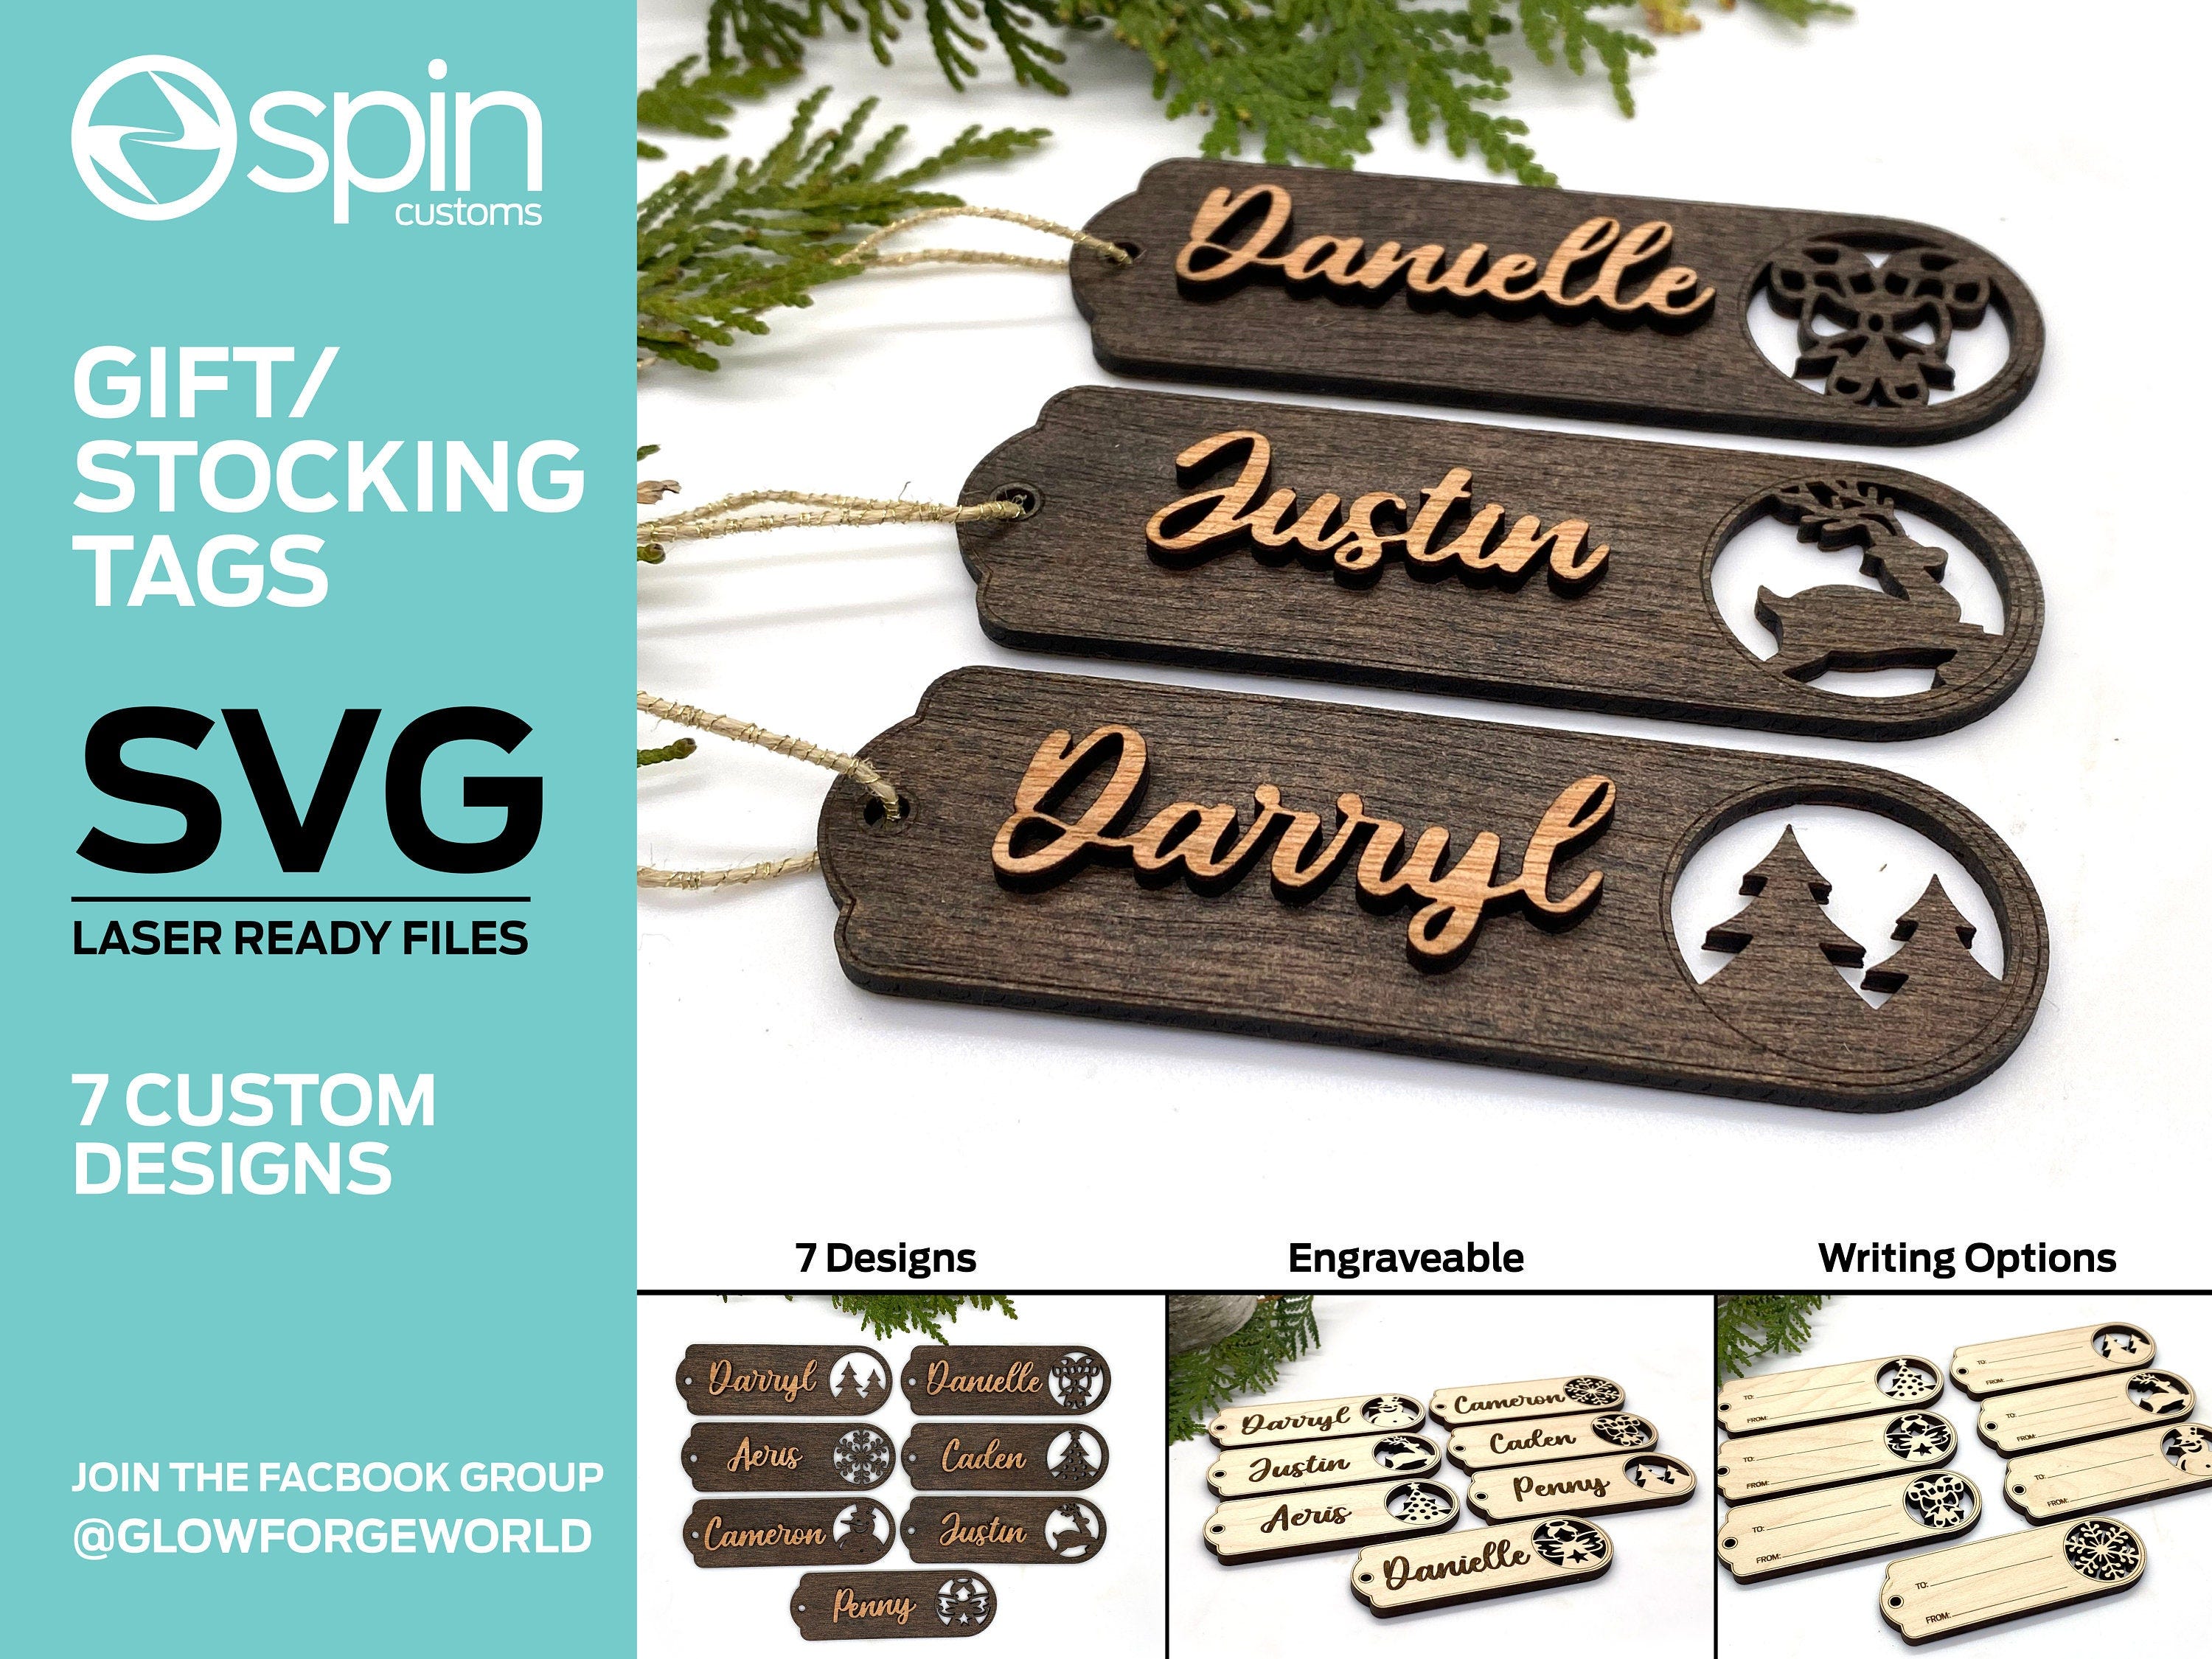 Gift/Stocking Tags Laser Ready Files - SVG - Glowforge